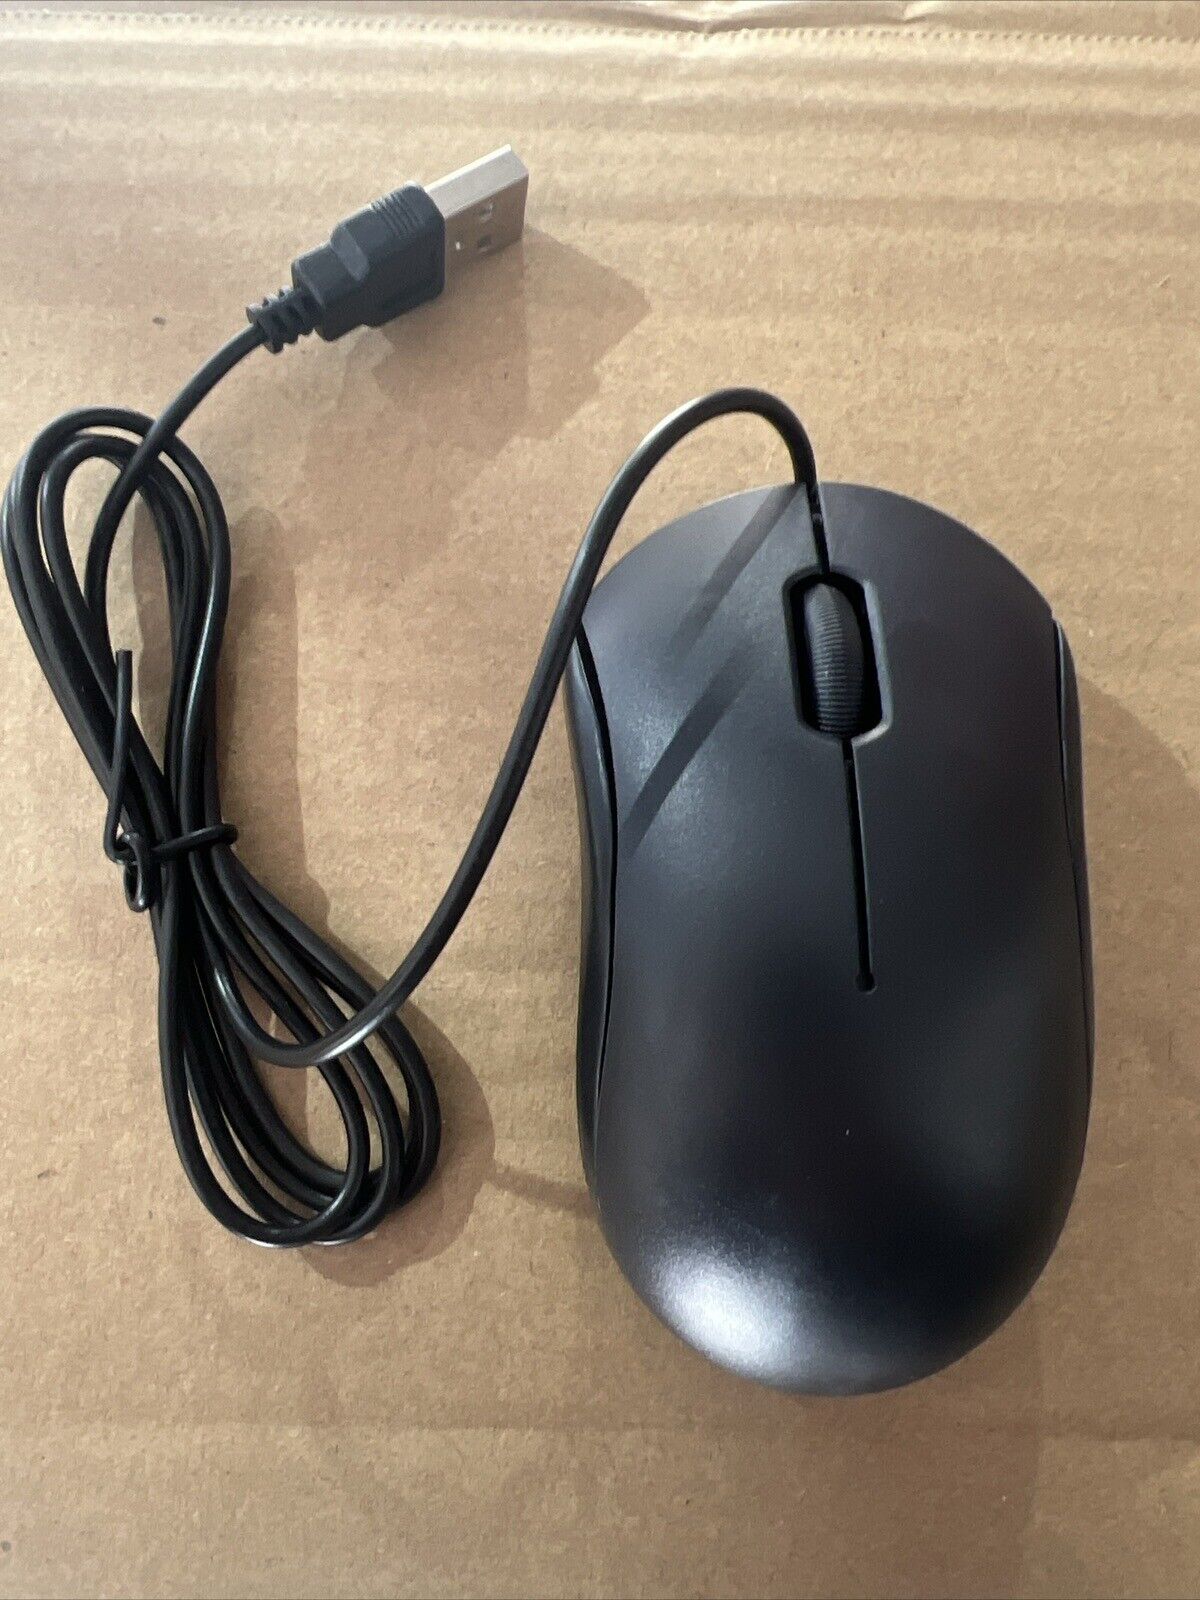 LOT OF 20  Black USB Wired Mouse - 3 Button with Scroll Wheel No Name Brand